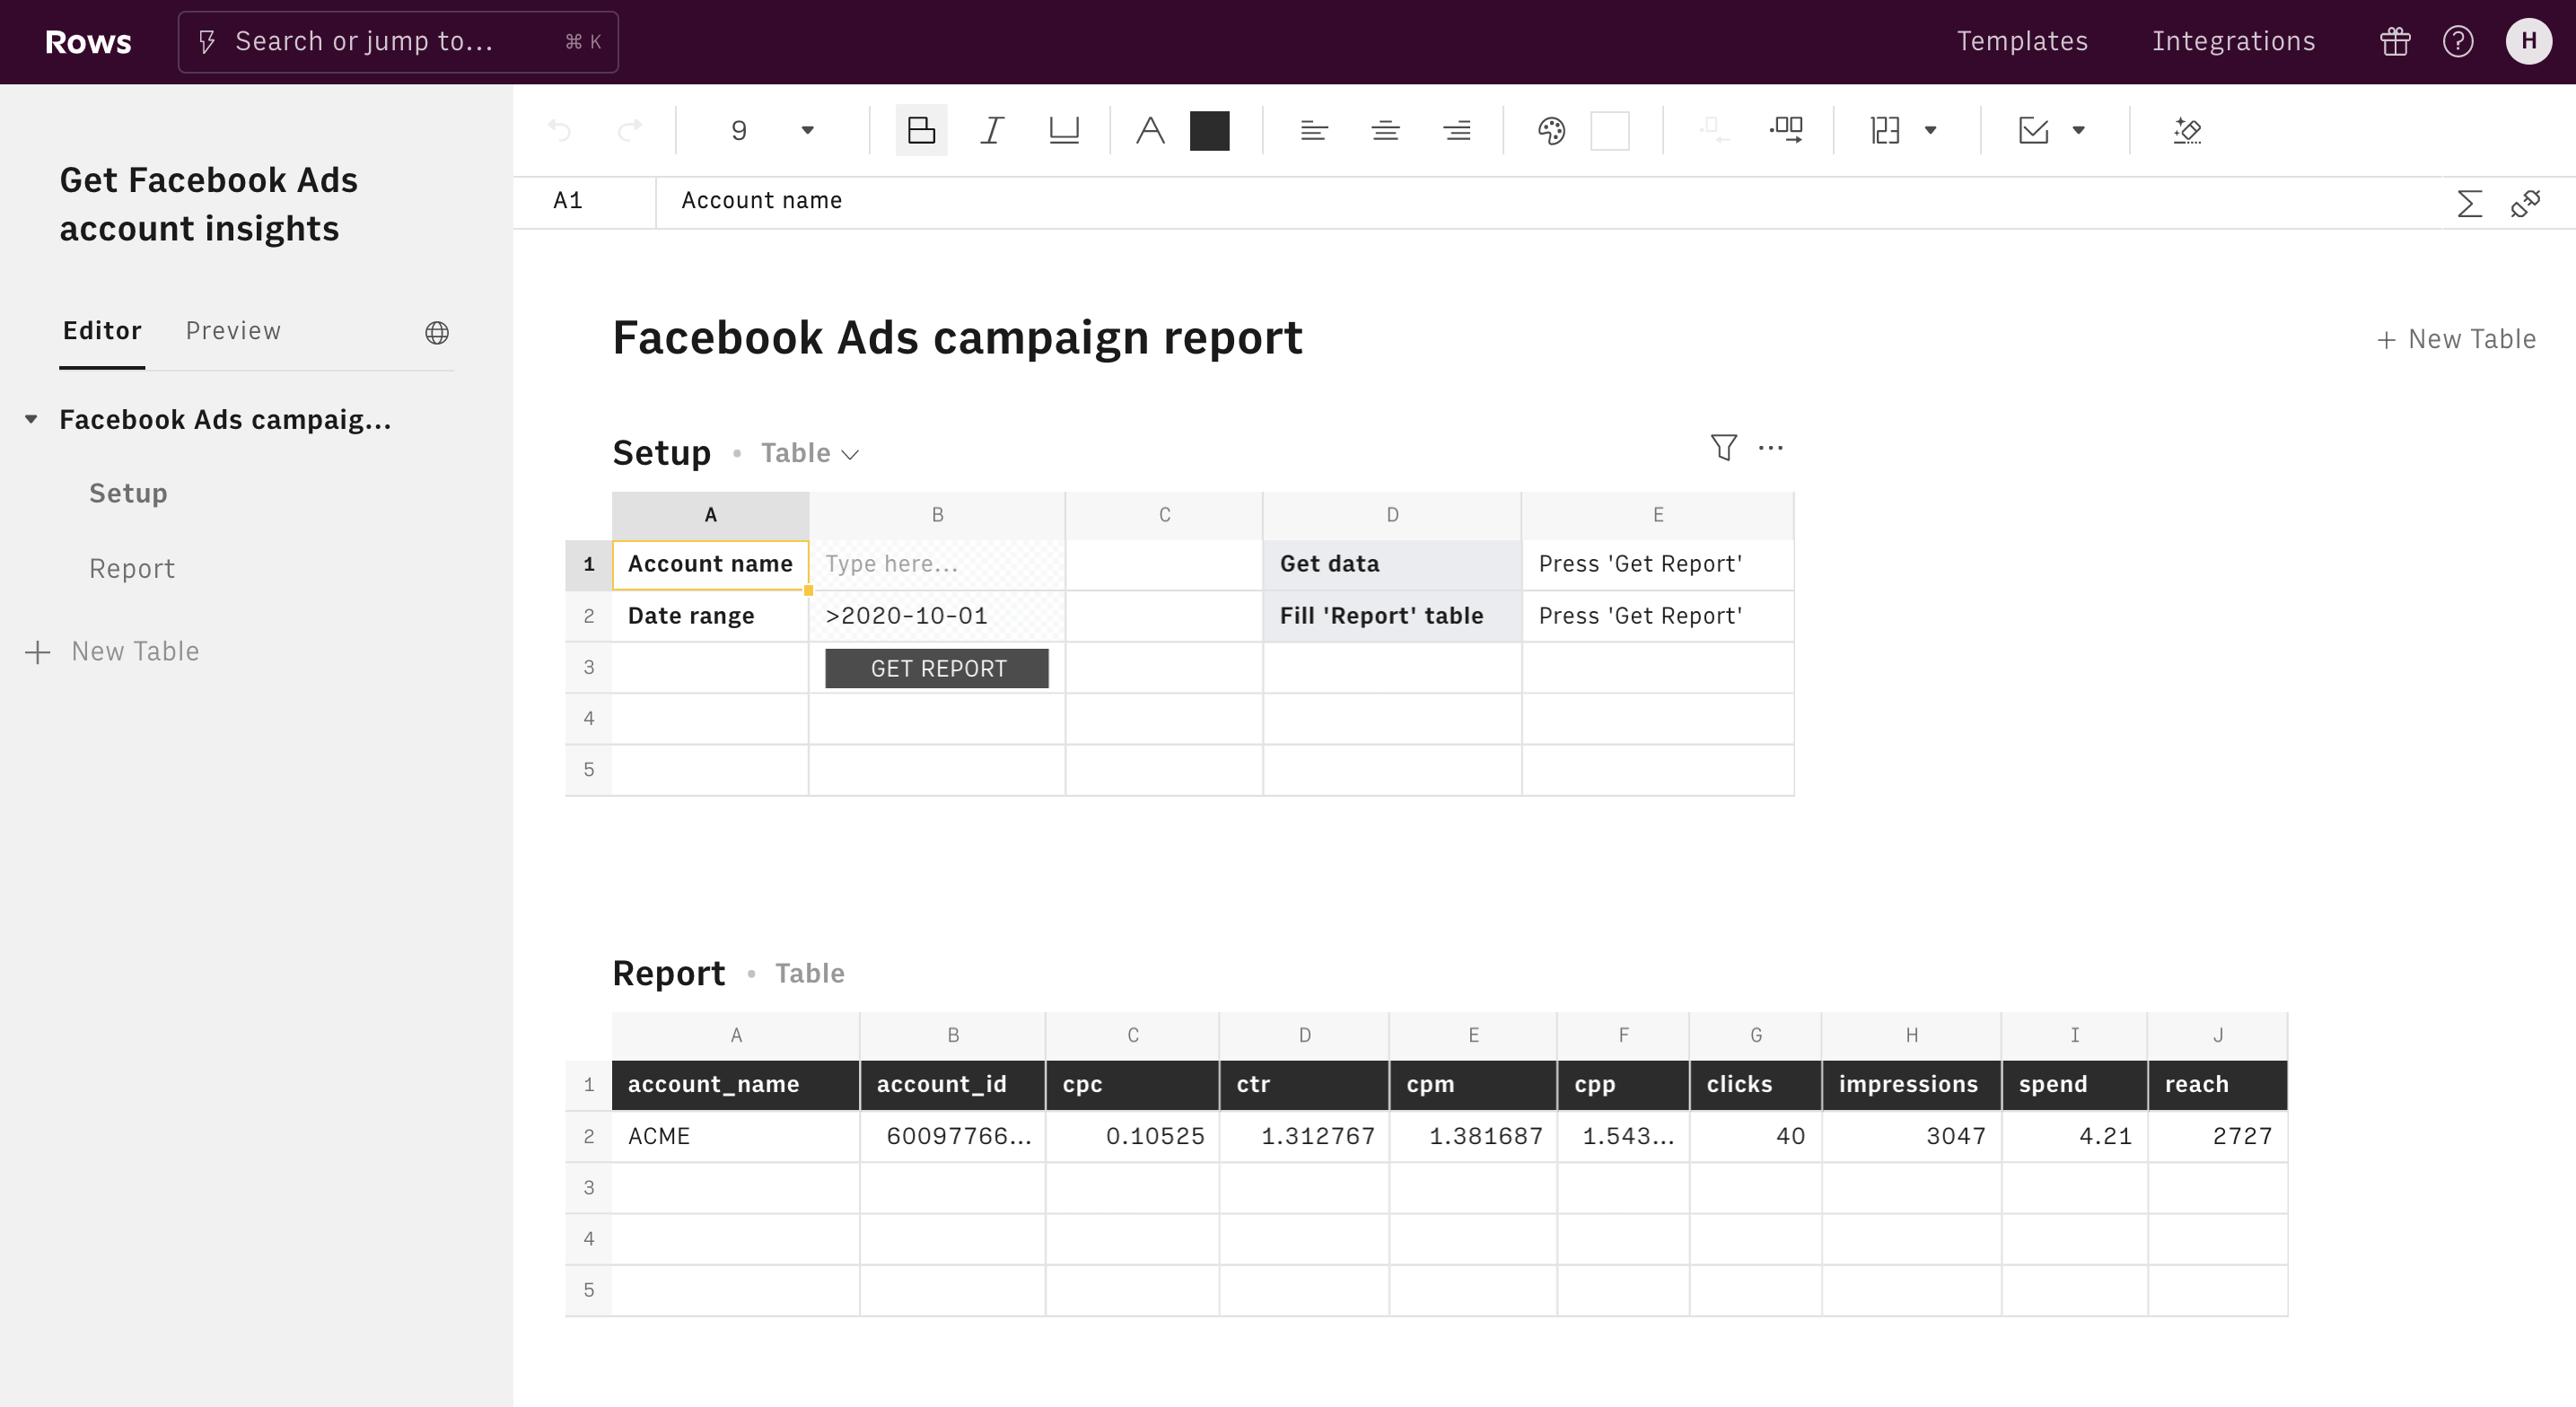 Get Facebook Ads account insights editor 1